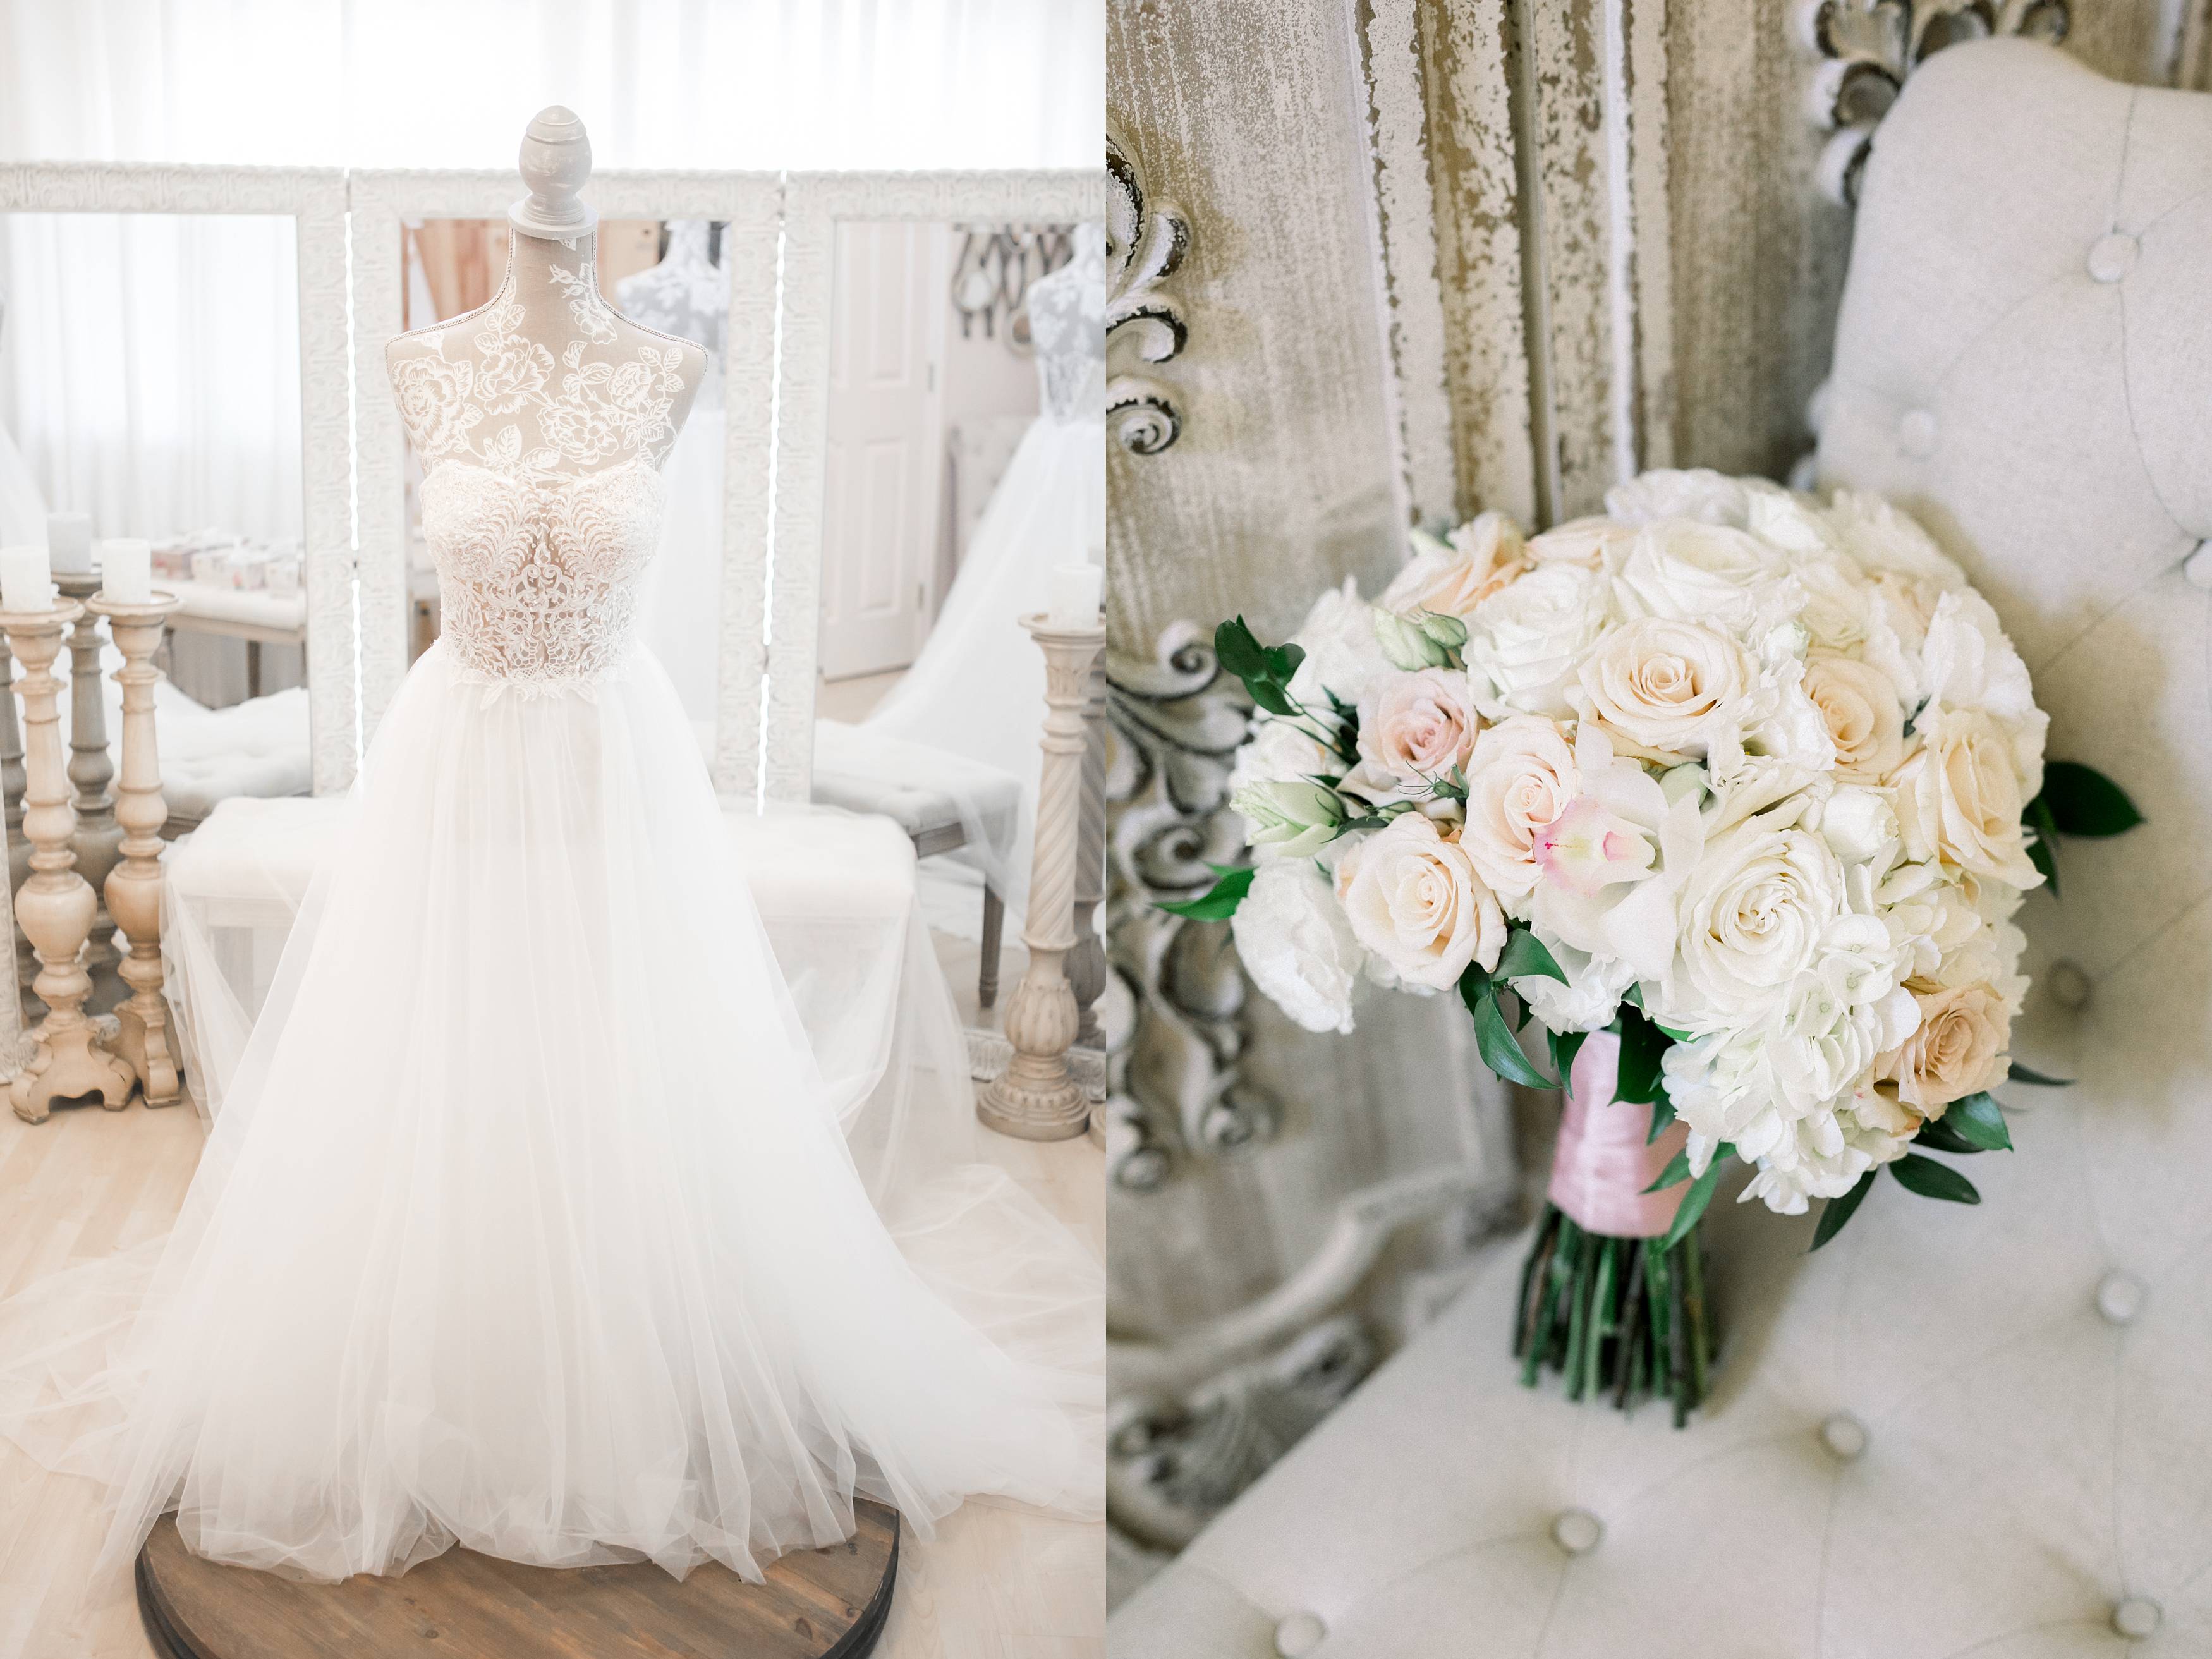 Bridal gown with lace and tulle with white and blush bridal bouquet 